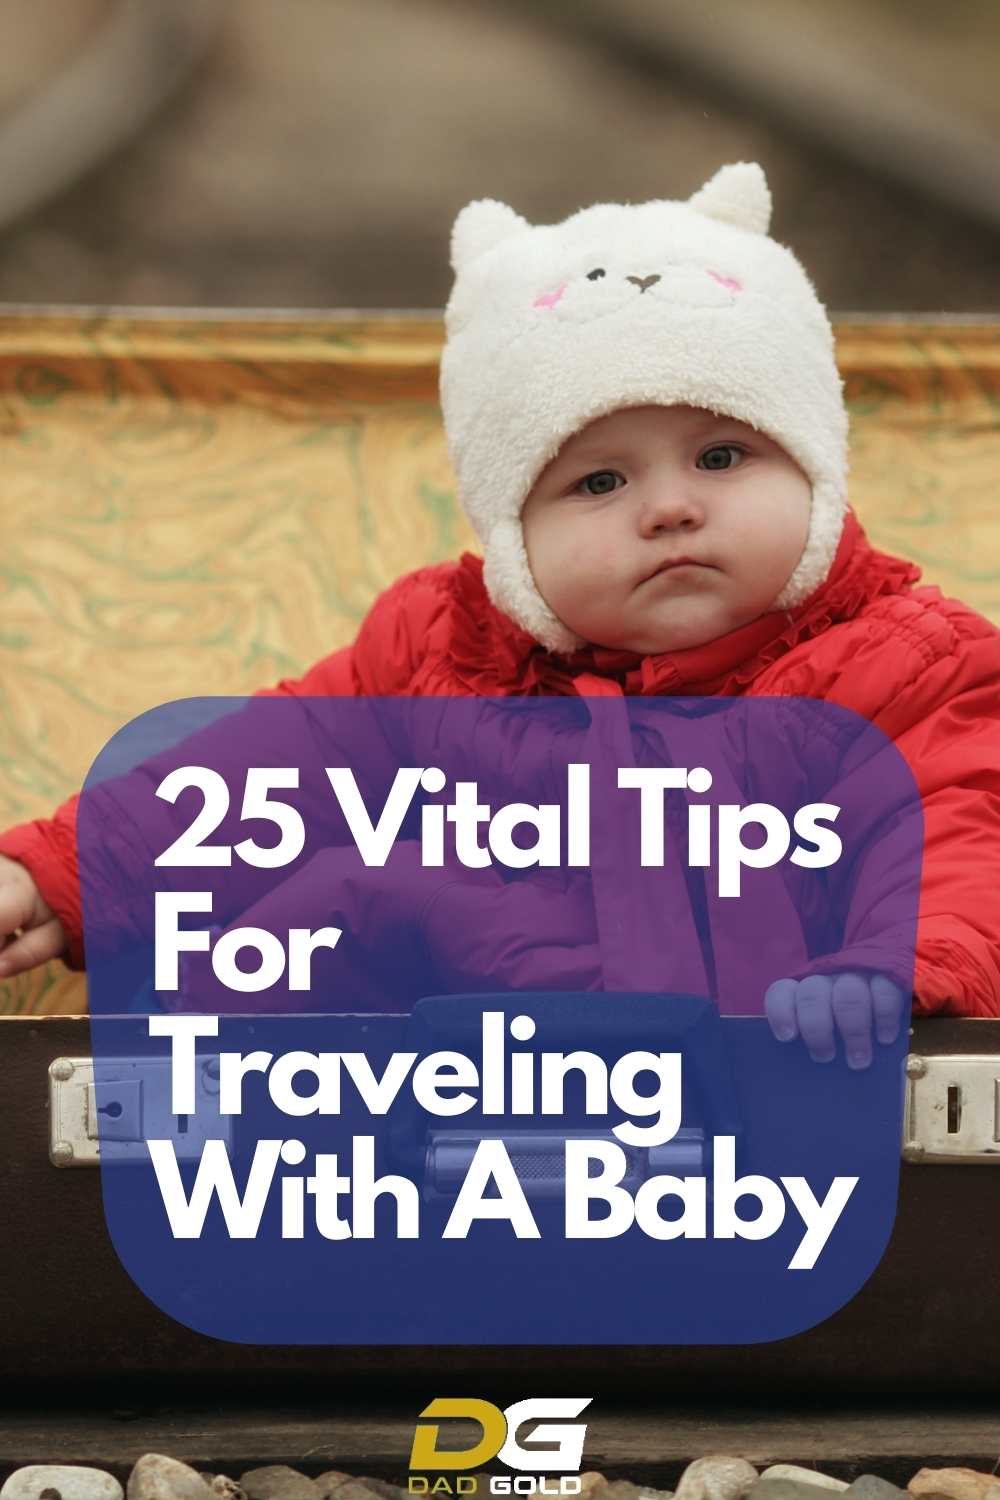 25 Vital Tips For Traveling With A Baby